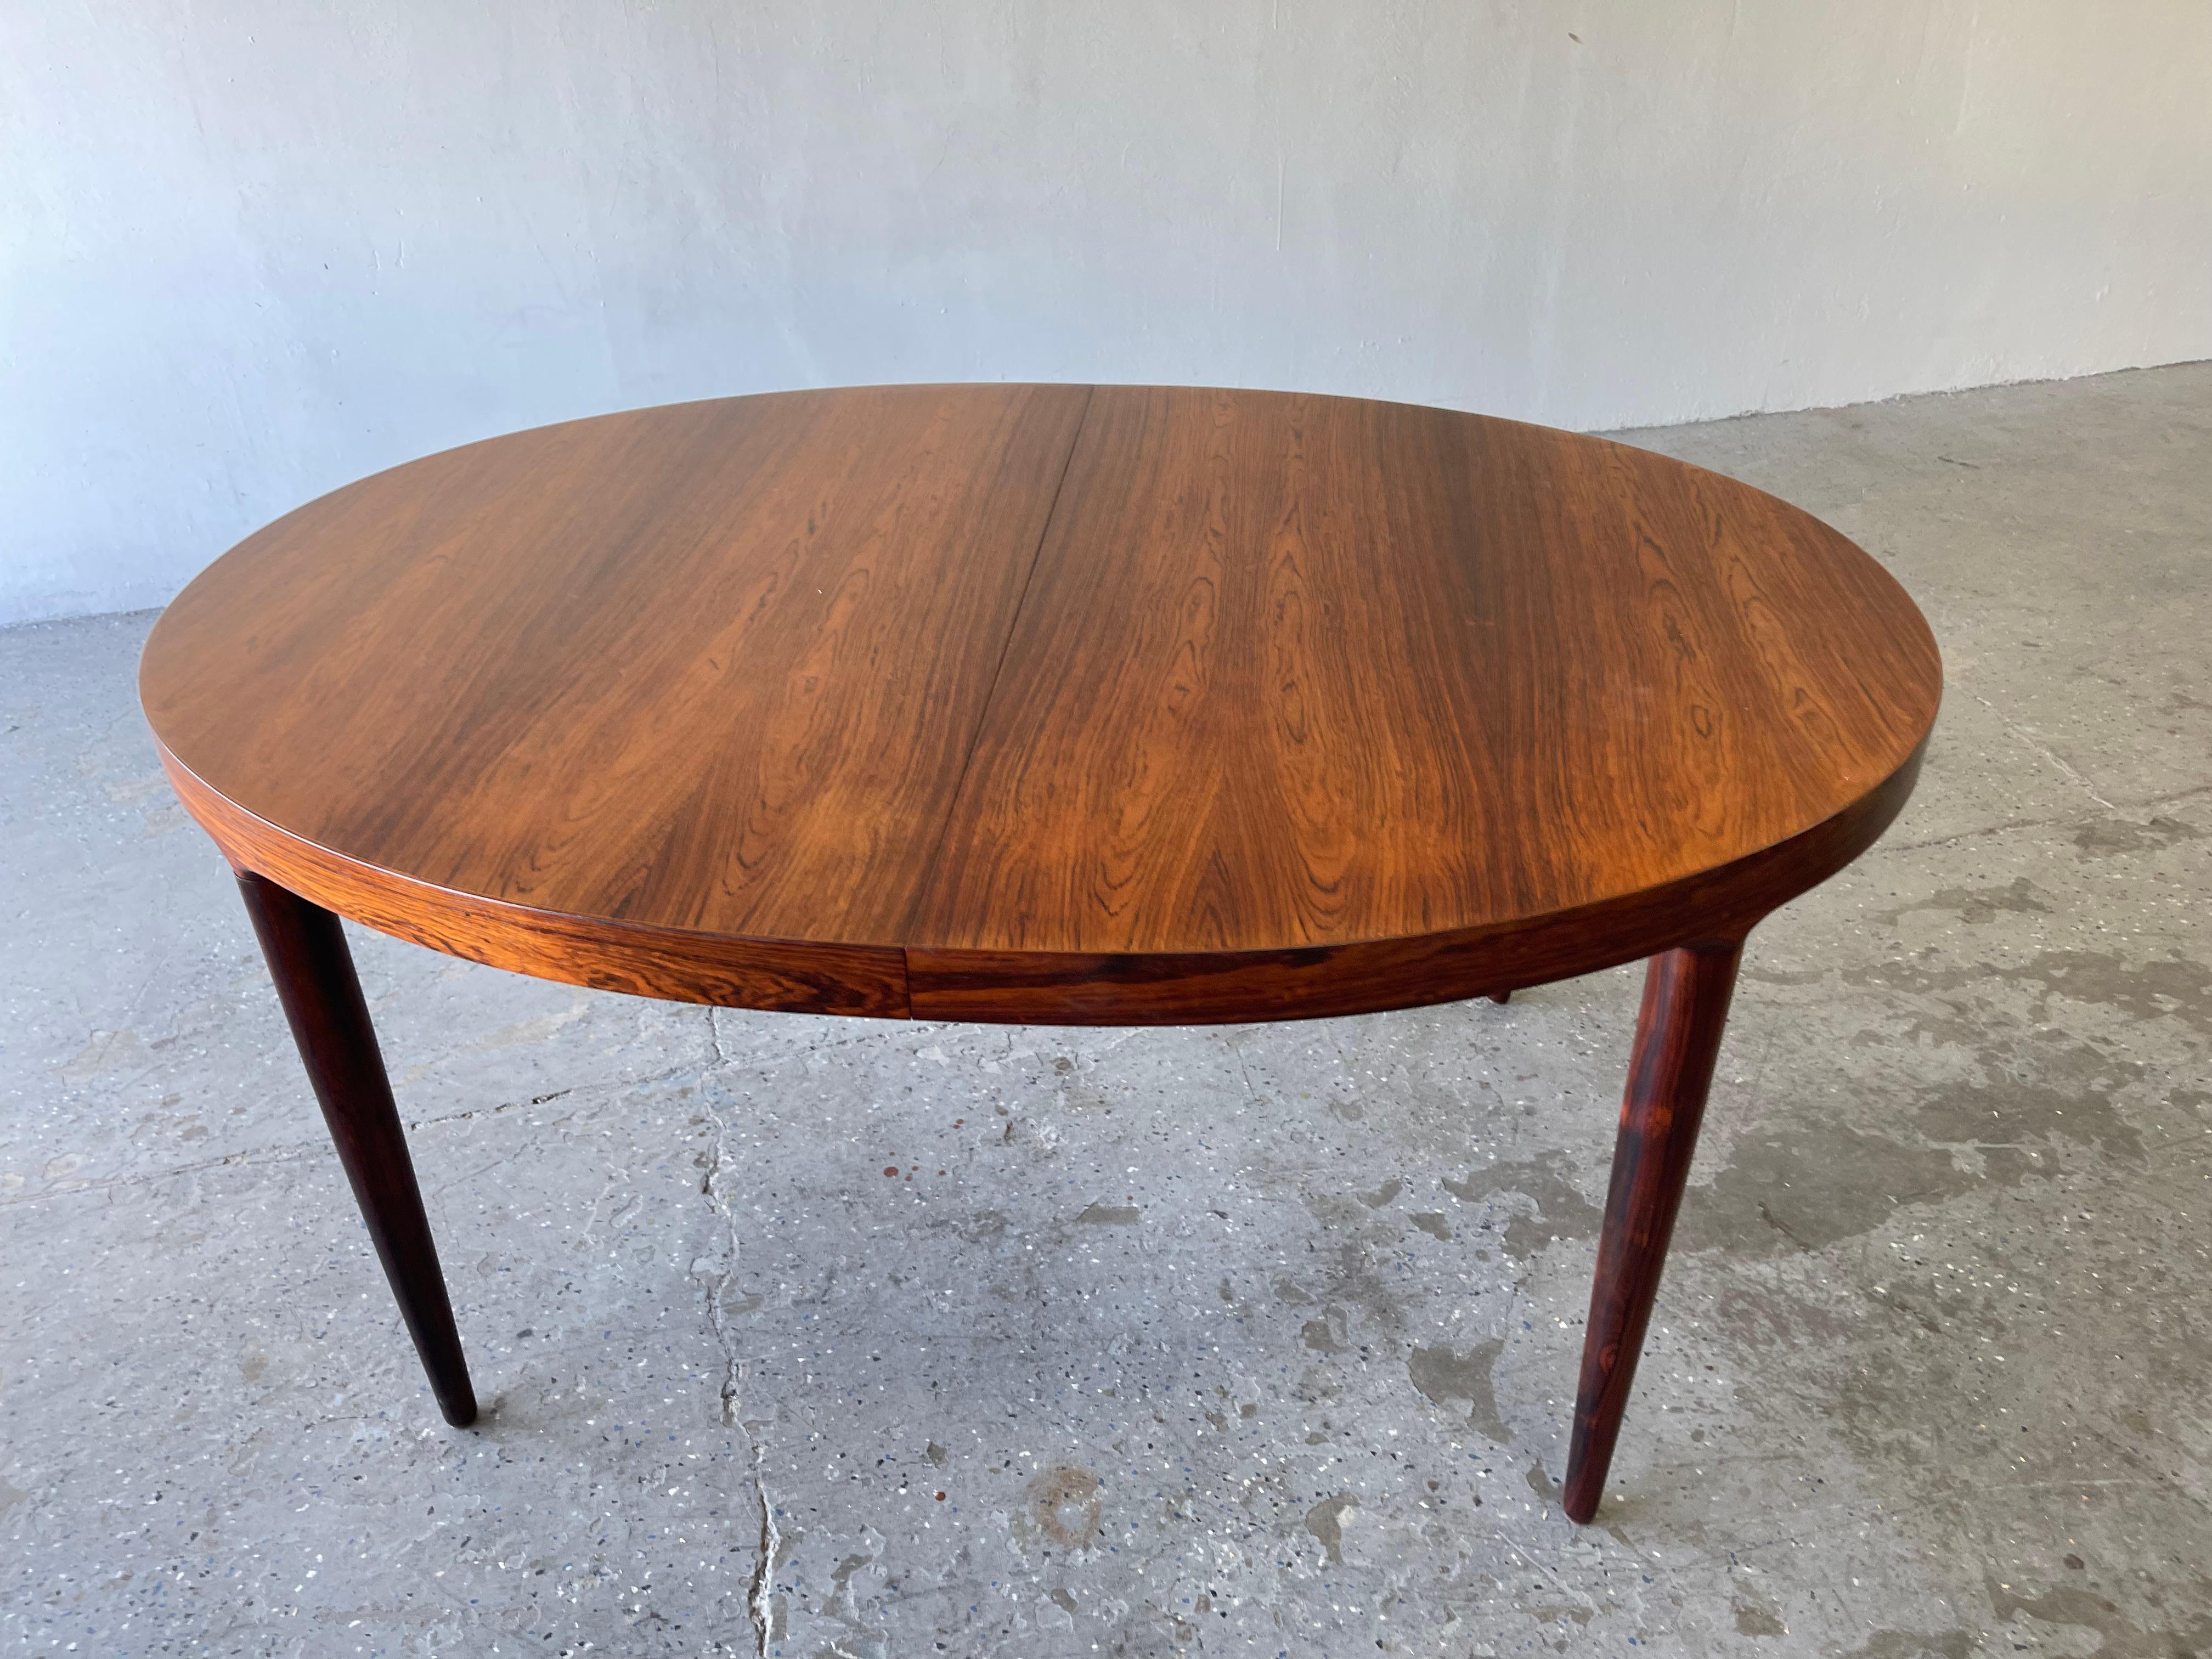 Danish Modern Moreddi Rosewood dining table with two leafs.

Beautiful Rosewood dining table by Moreddi of Denmark designed by Harry Ostergaard. The rosewood grain is just stunning. Photos tell the whole story. Very rare table don’t miss